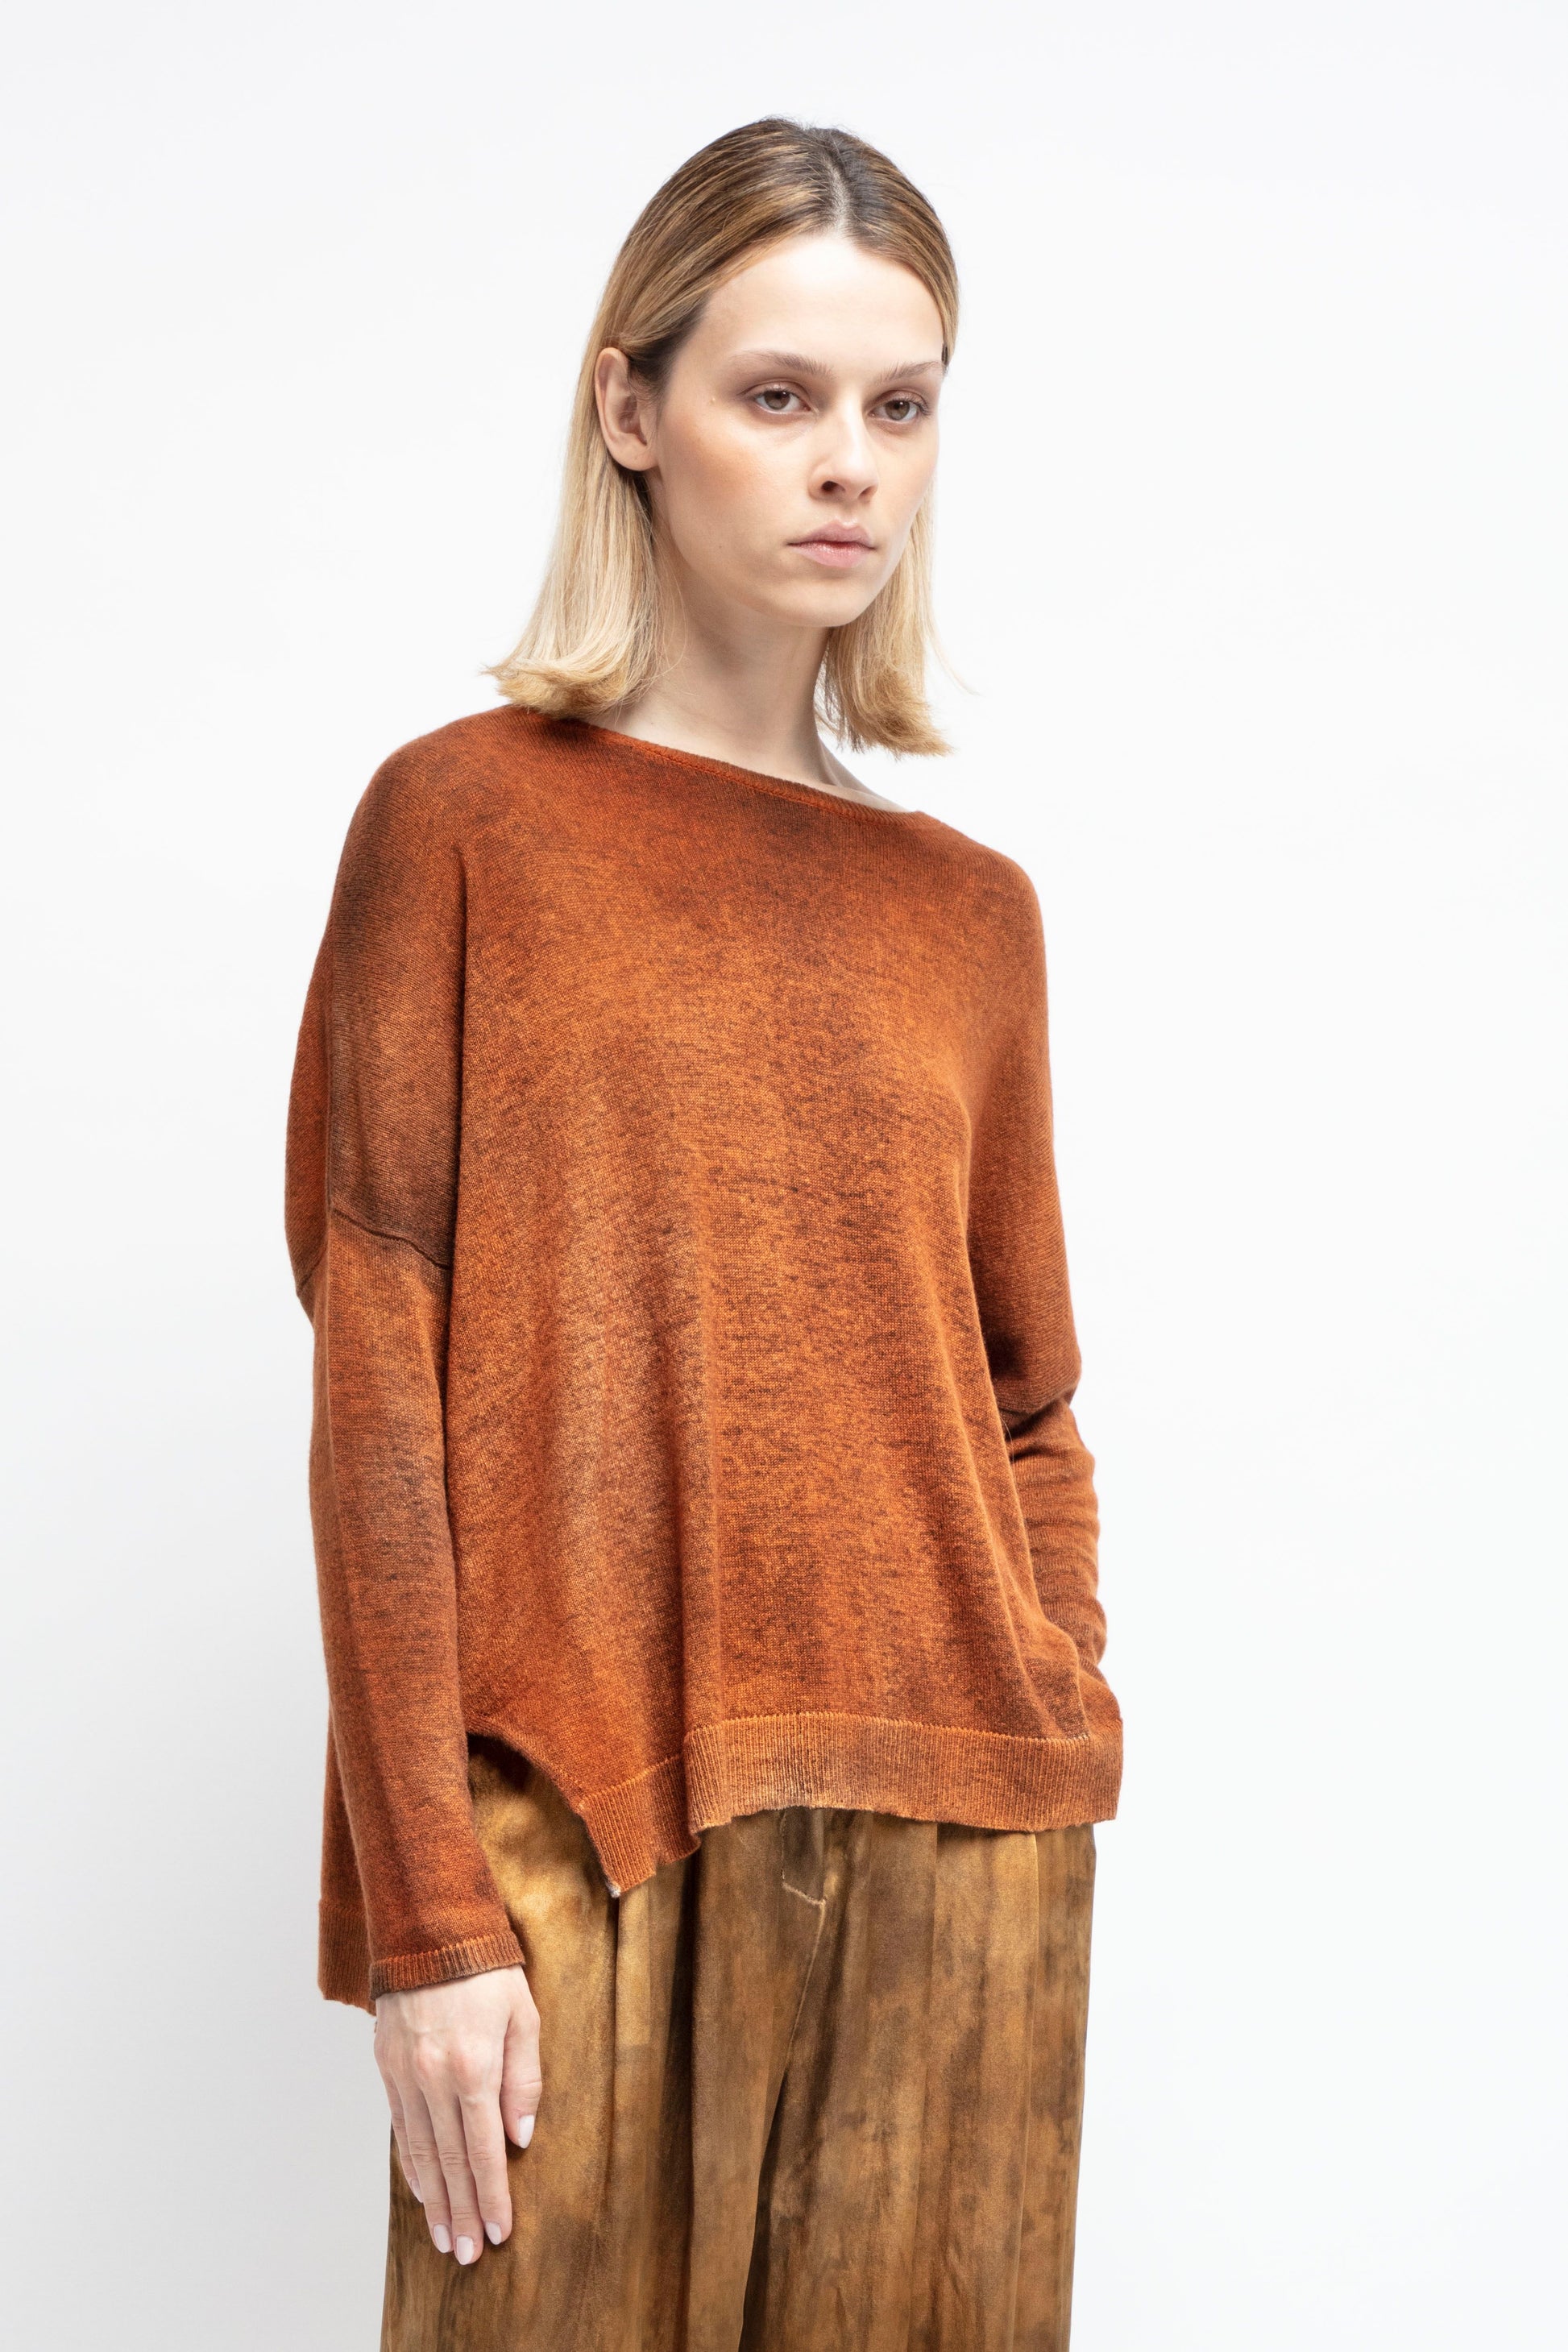 Boat neck oversize pullover with slits   N/Marmalade  Pre order now! Receive your order by May 15th, 2021 the latest. 